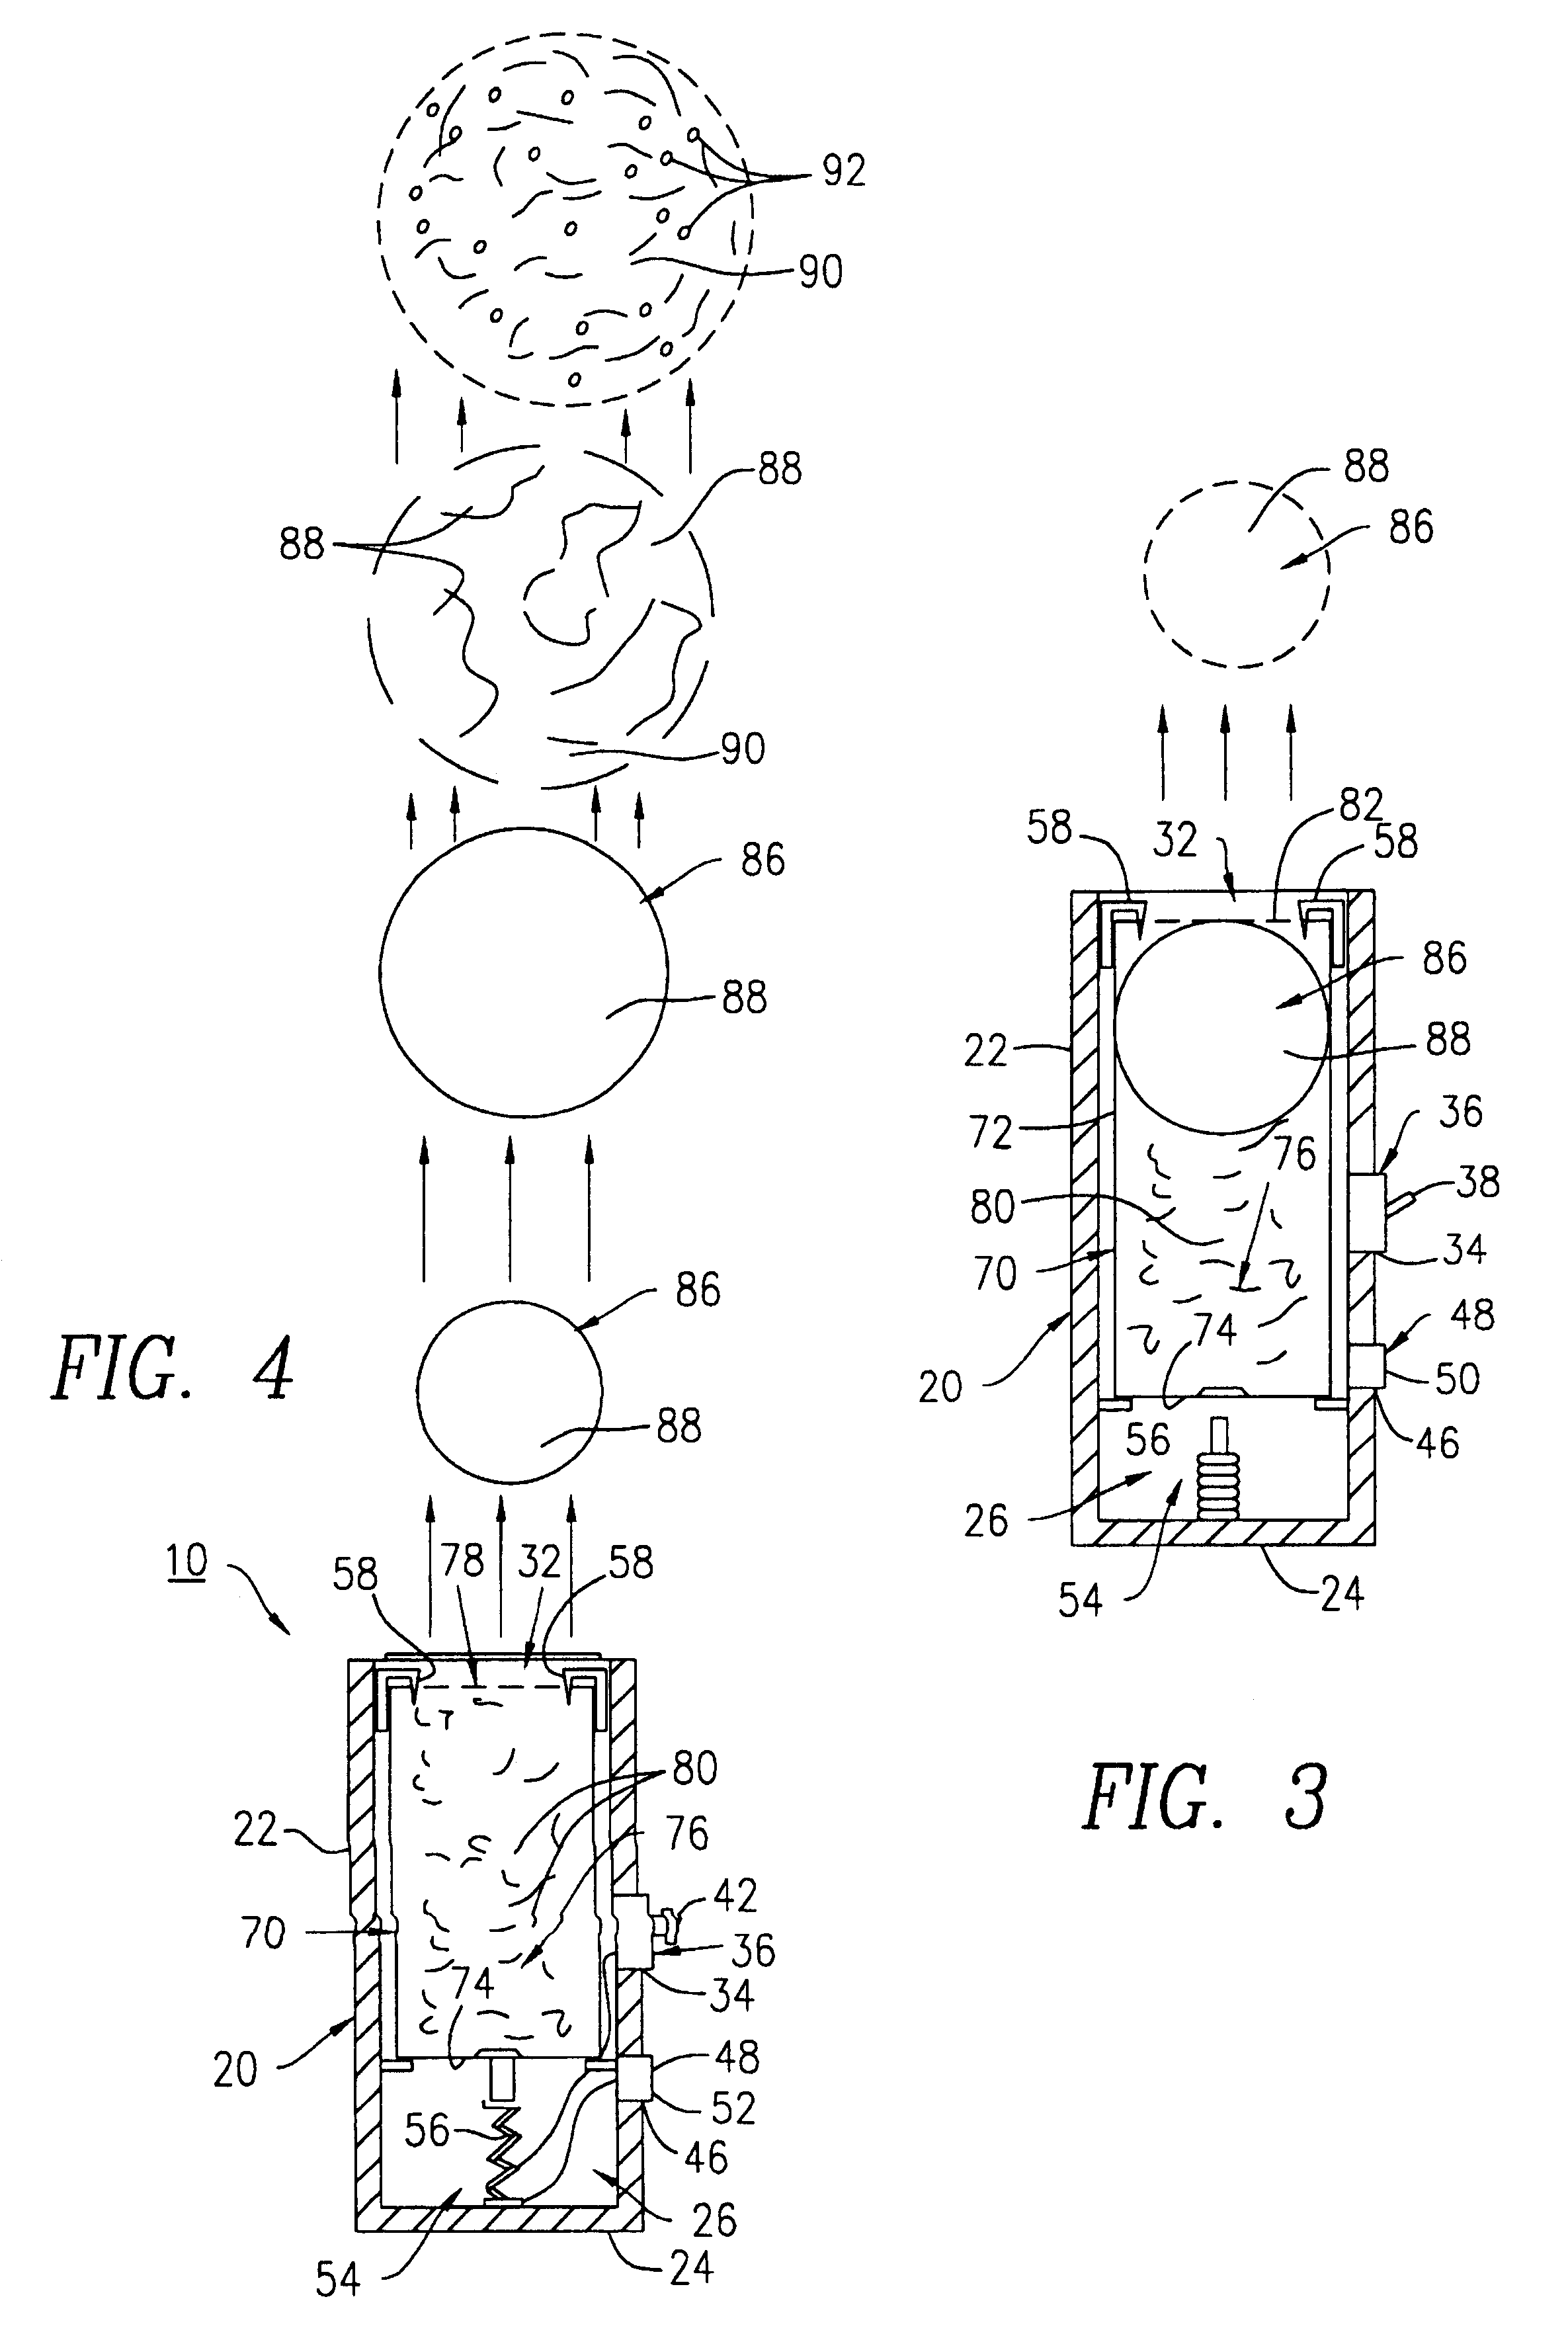 Compressed gas visual notification device for signaling distress